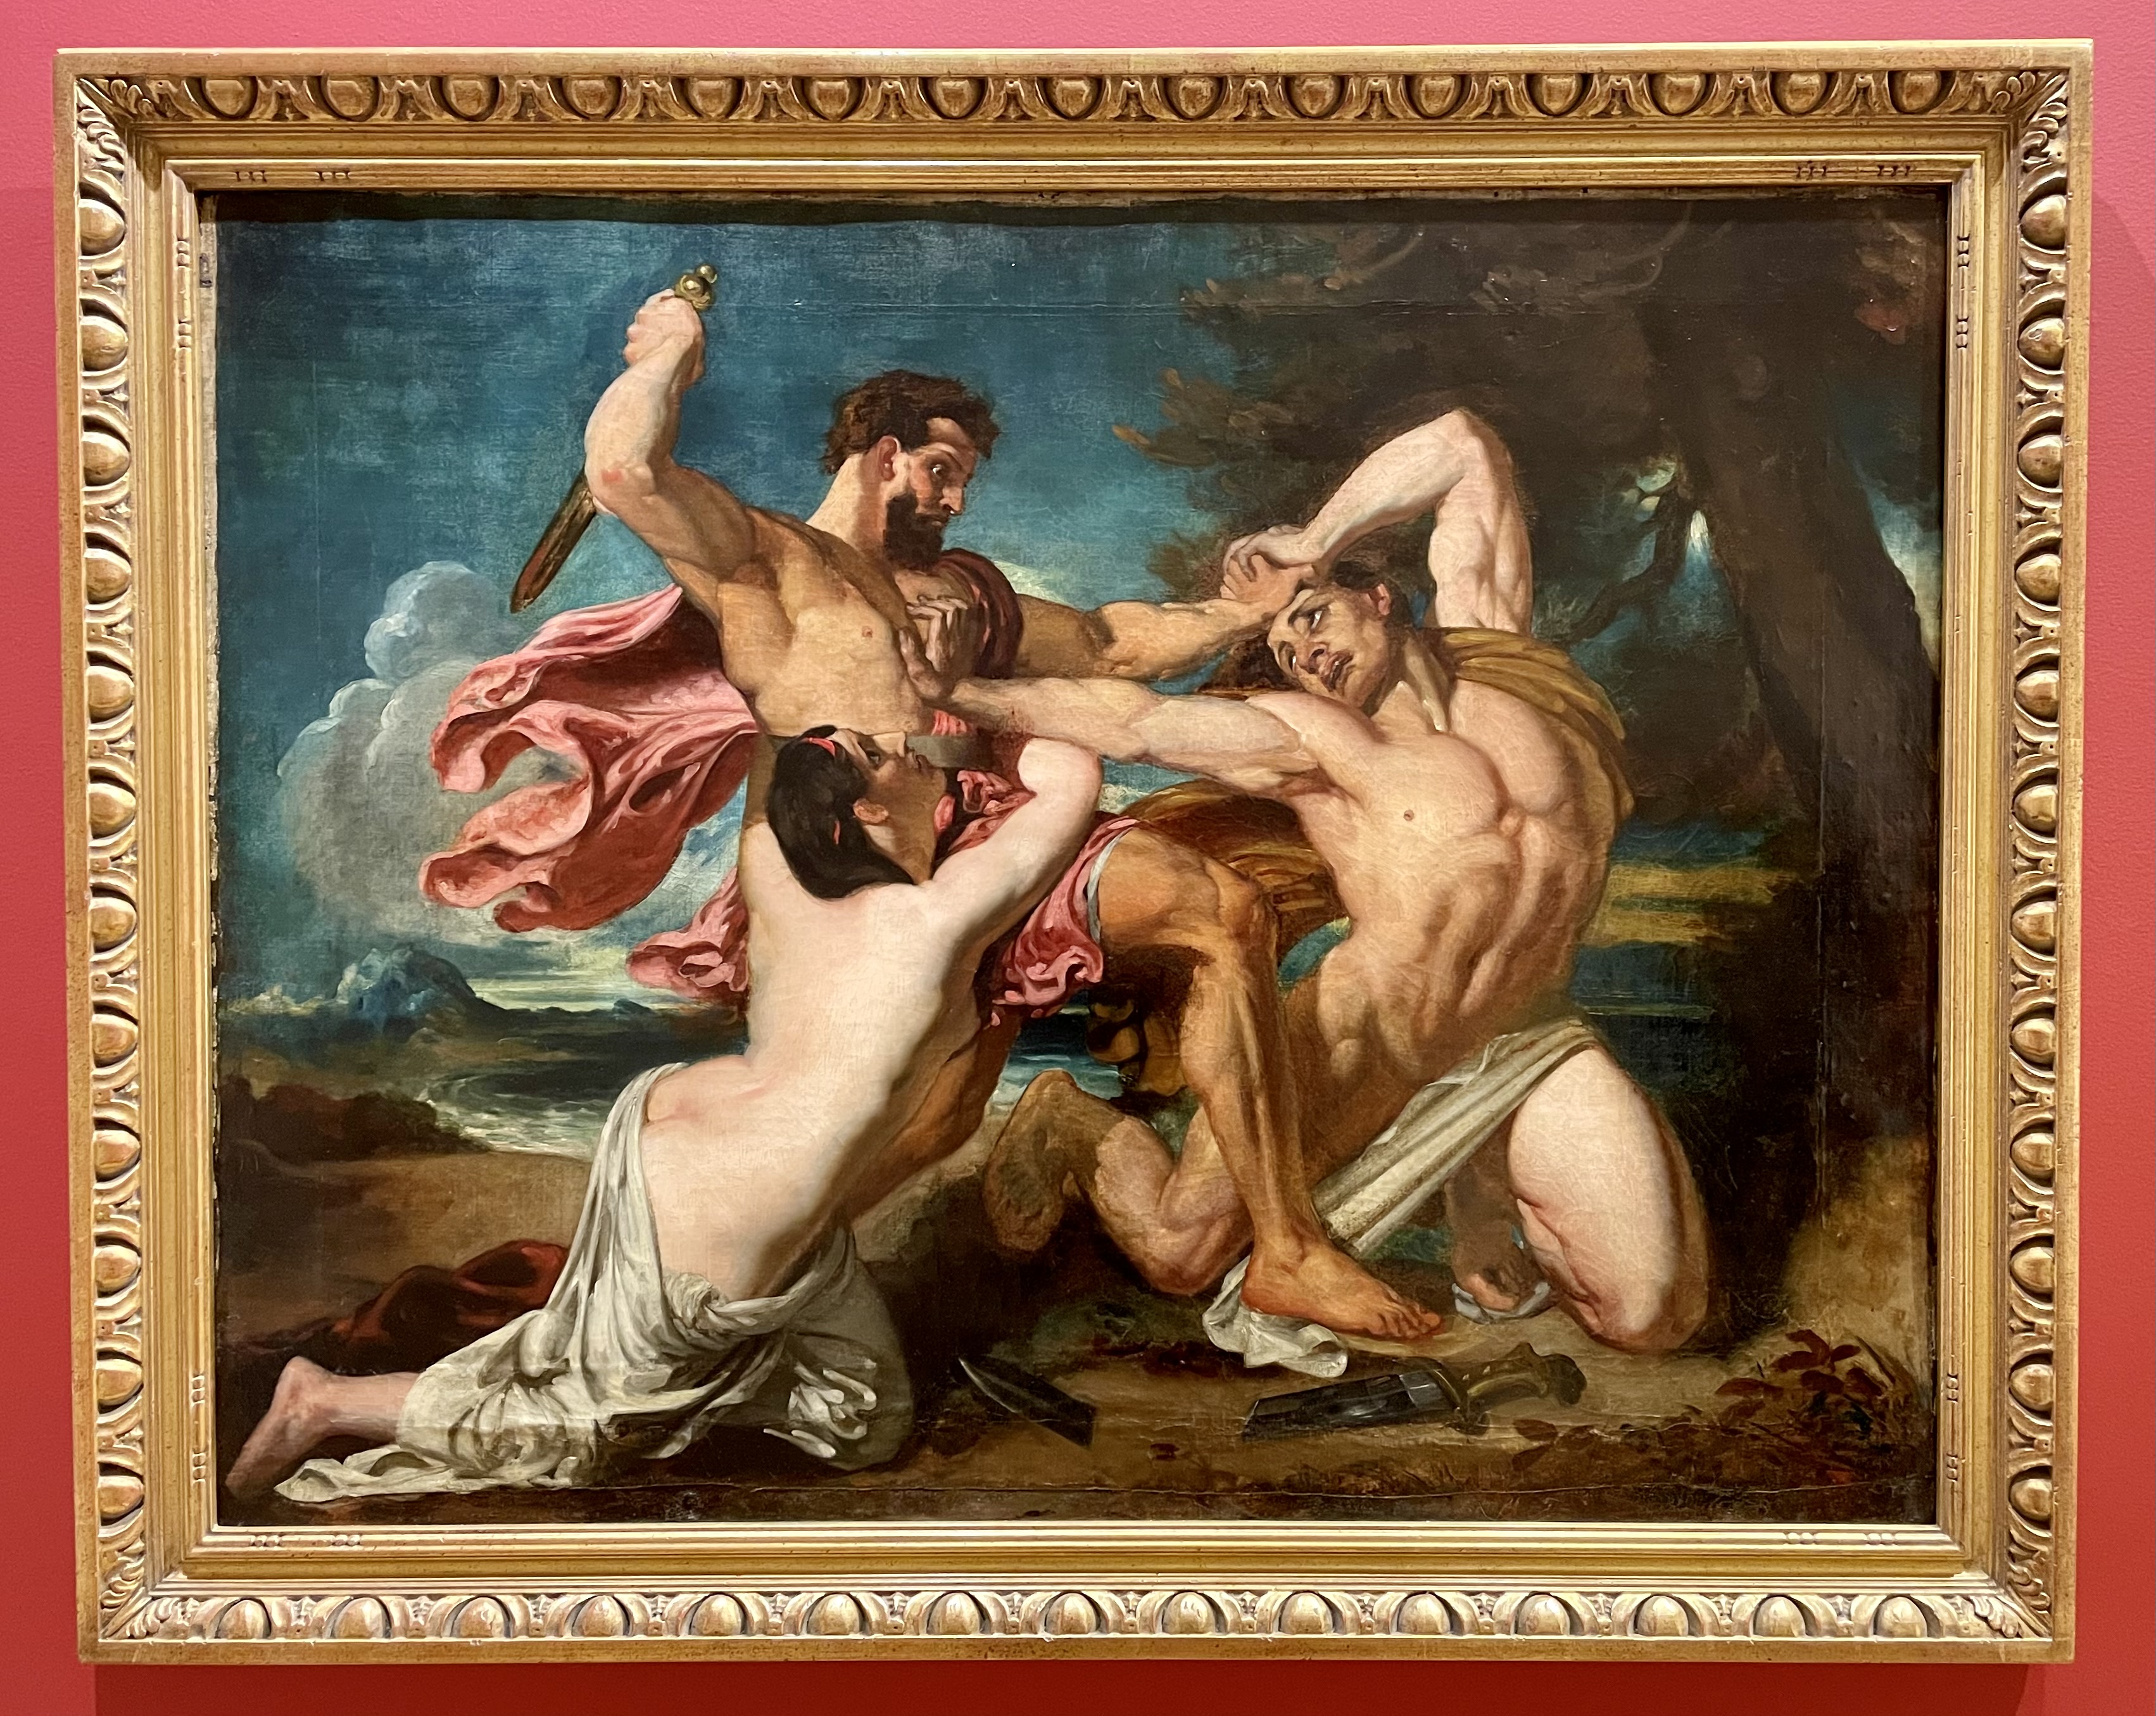 Oil painting of three figures fighting, titled, "Allegory (The Combat)"